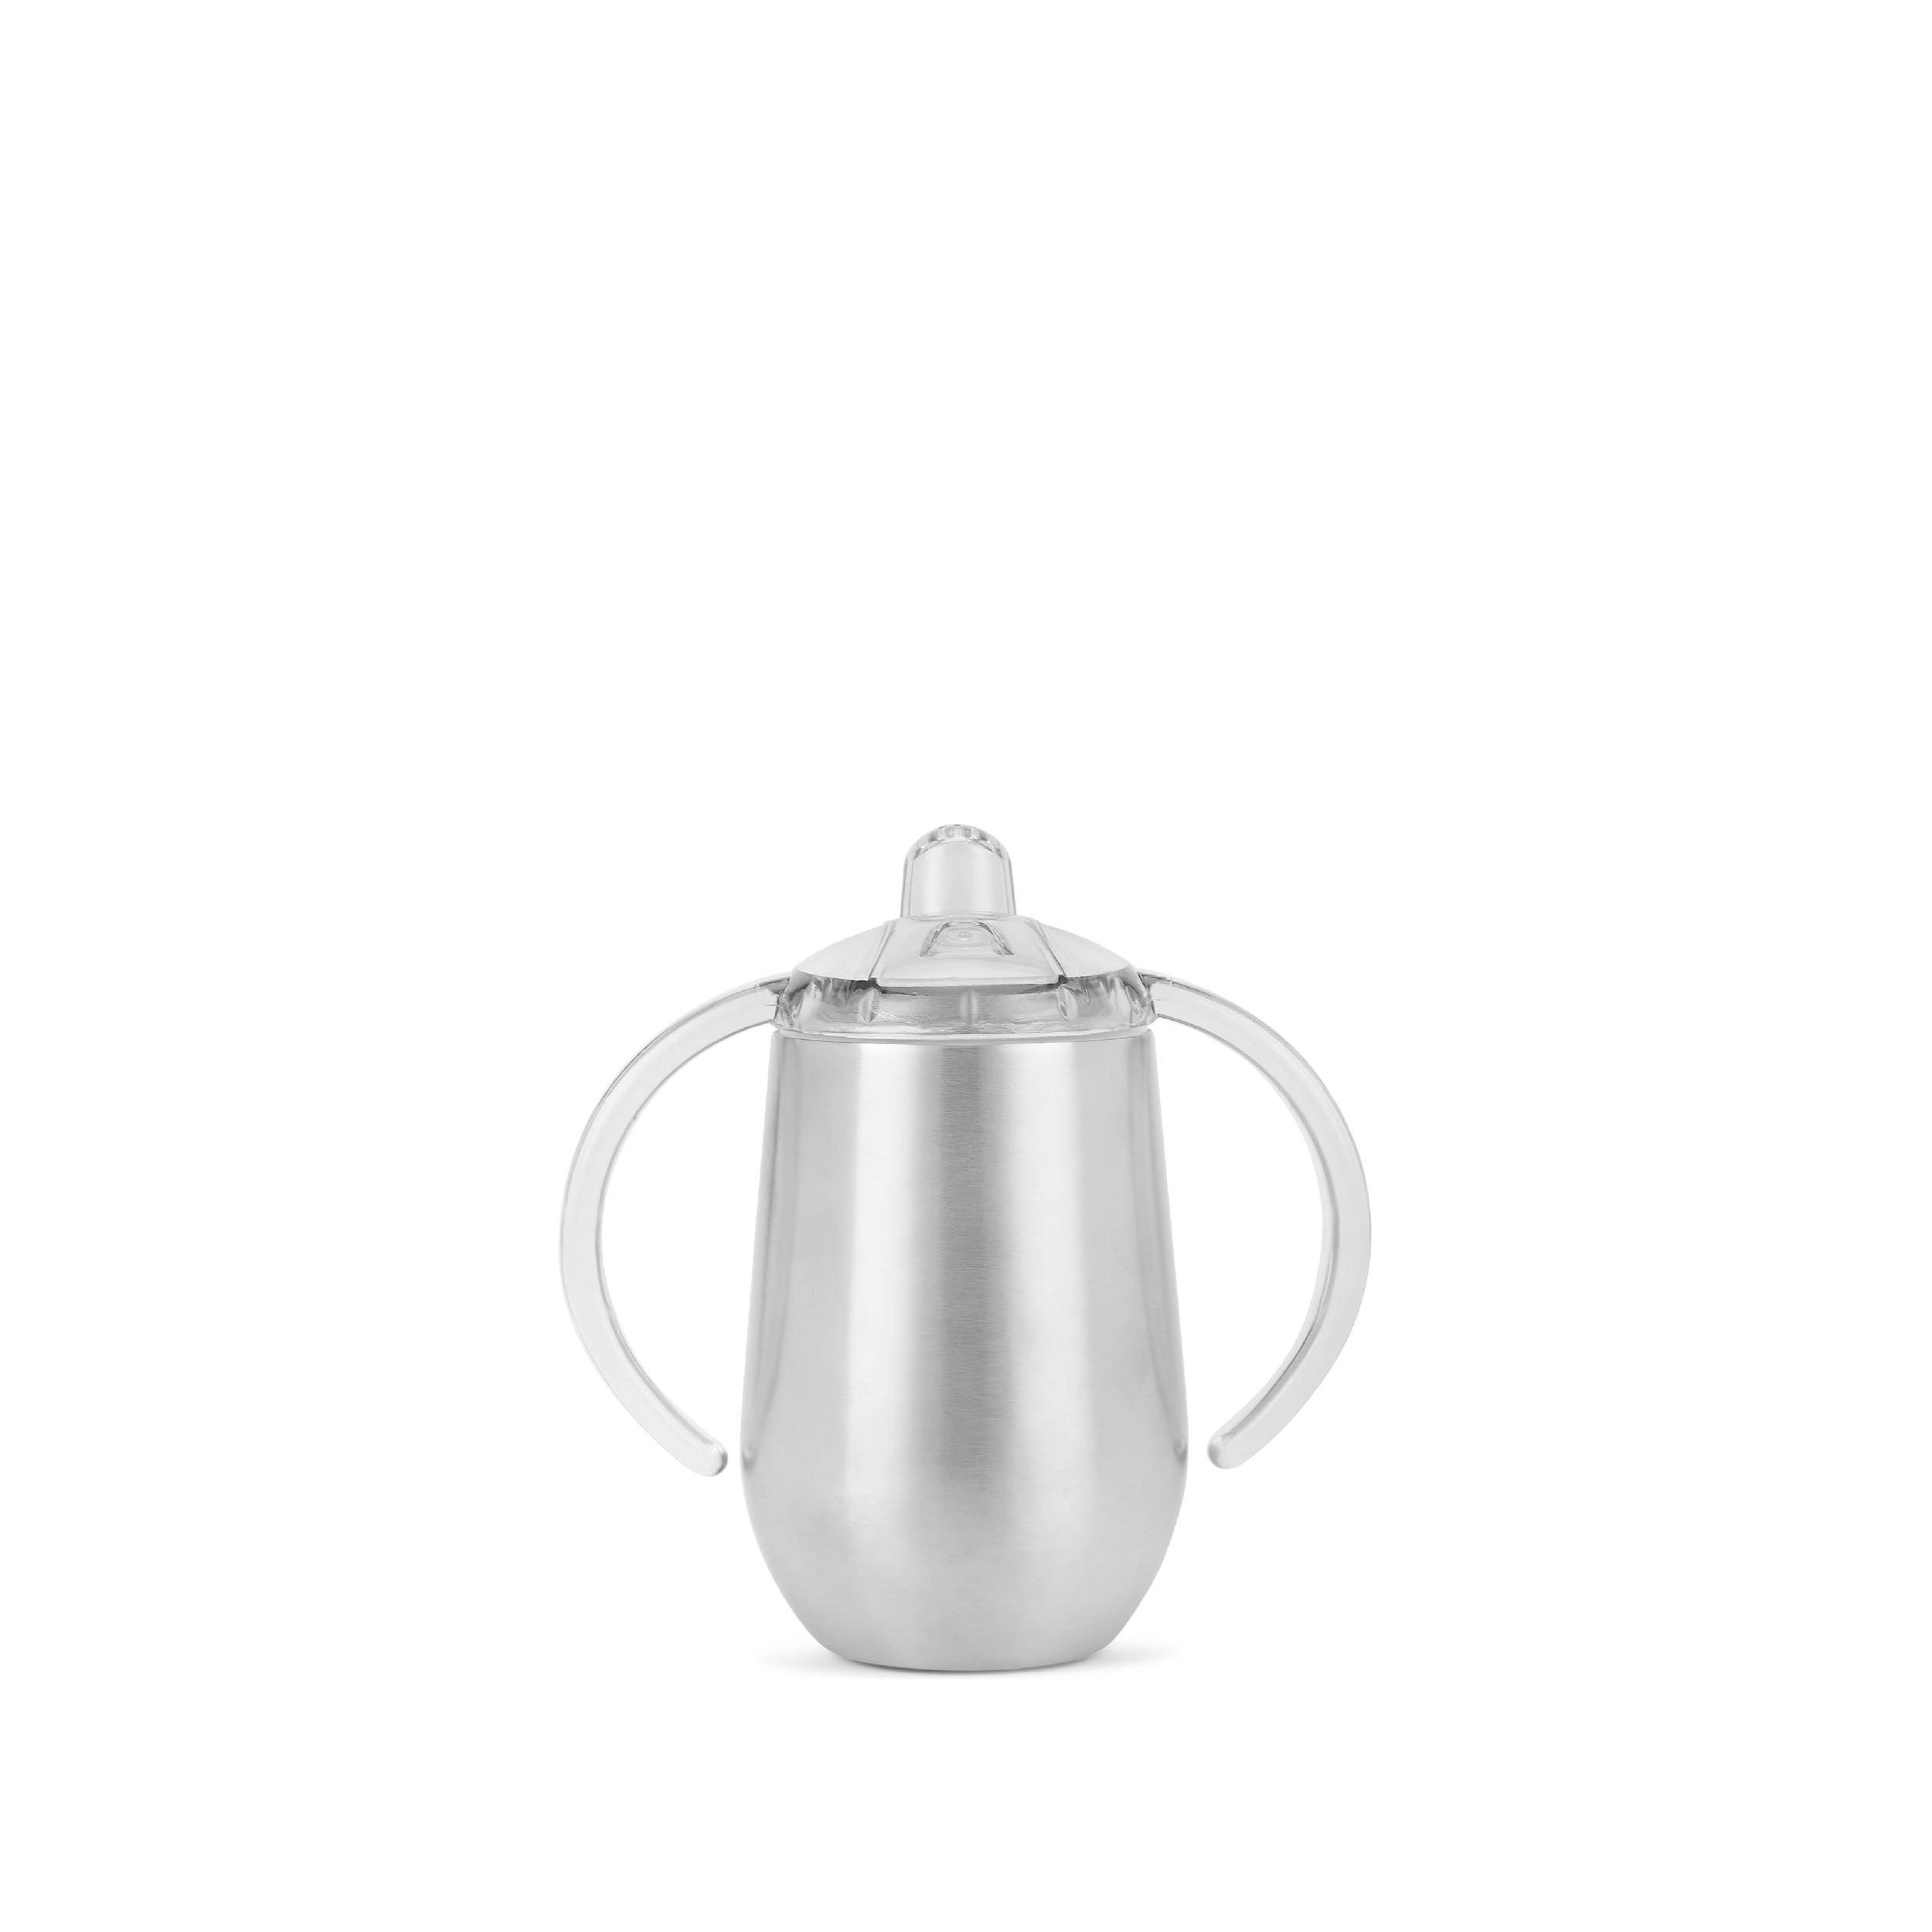 MakerFlo Crafts Sippy Cup, Stainless Steel, Case of 25, 8oz